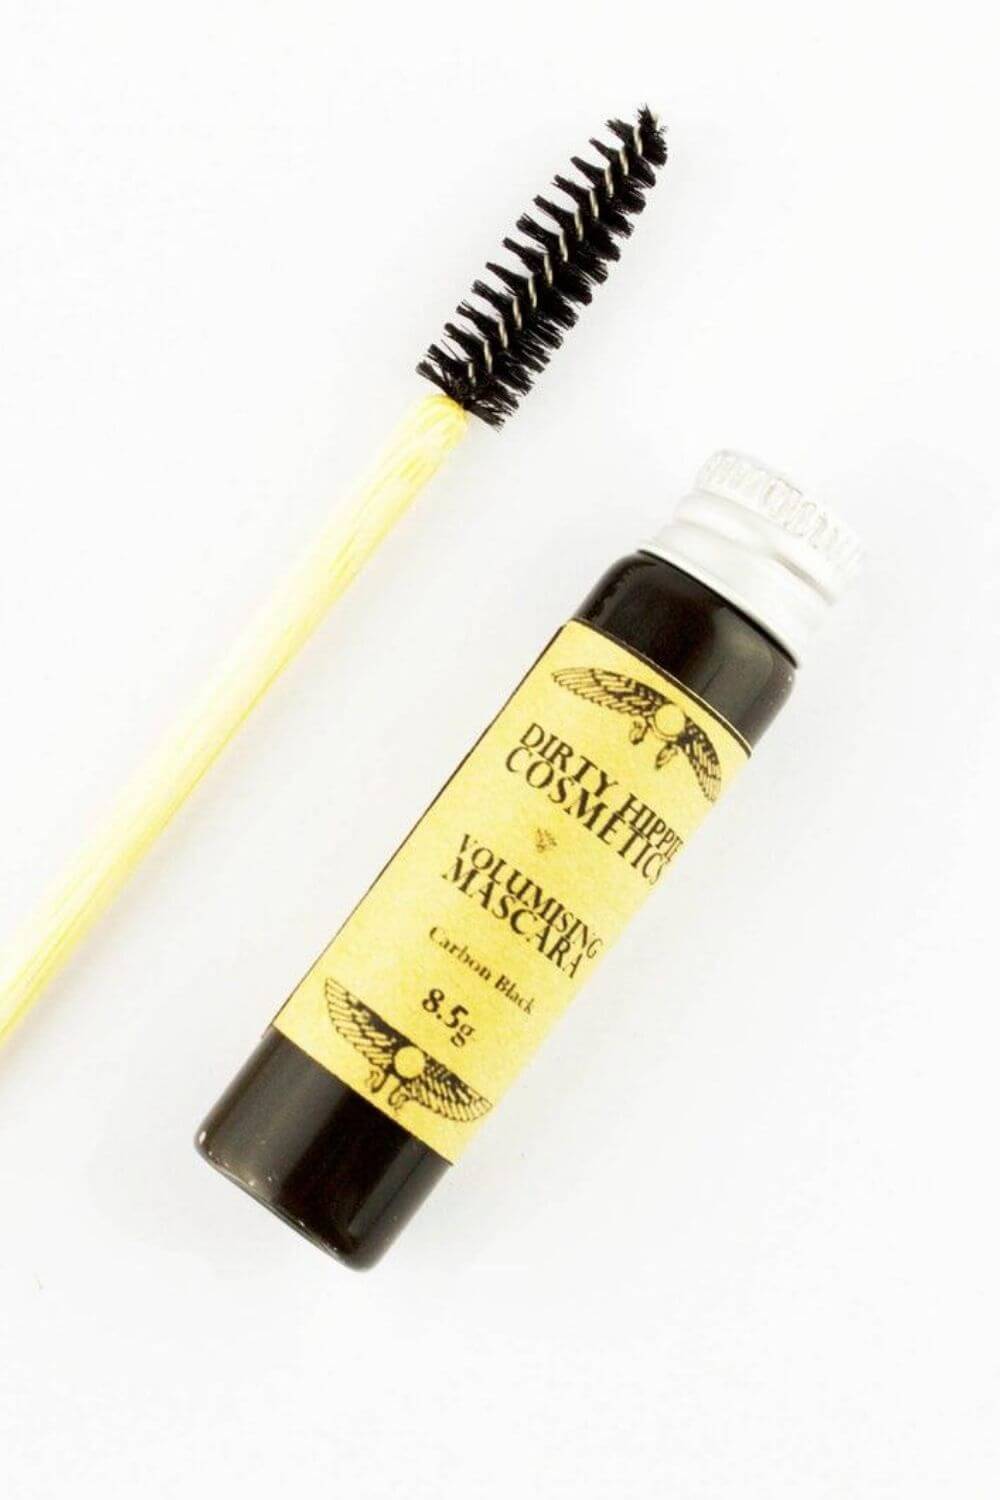 Zero waste looks good on everyone, just like long lashes! Lucky for us, the two aren’t mutually exclusive. Here's a list of our favourite zero waste options Image by Dirty Hippie Cosmetics #zerowastemascara #zerowaste